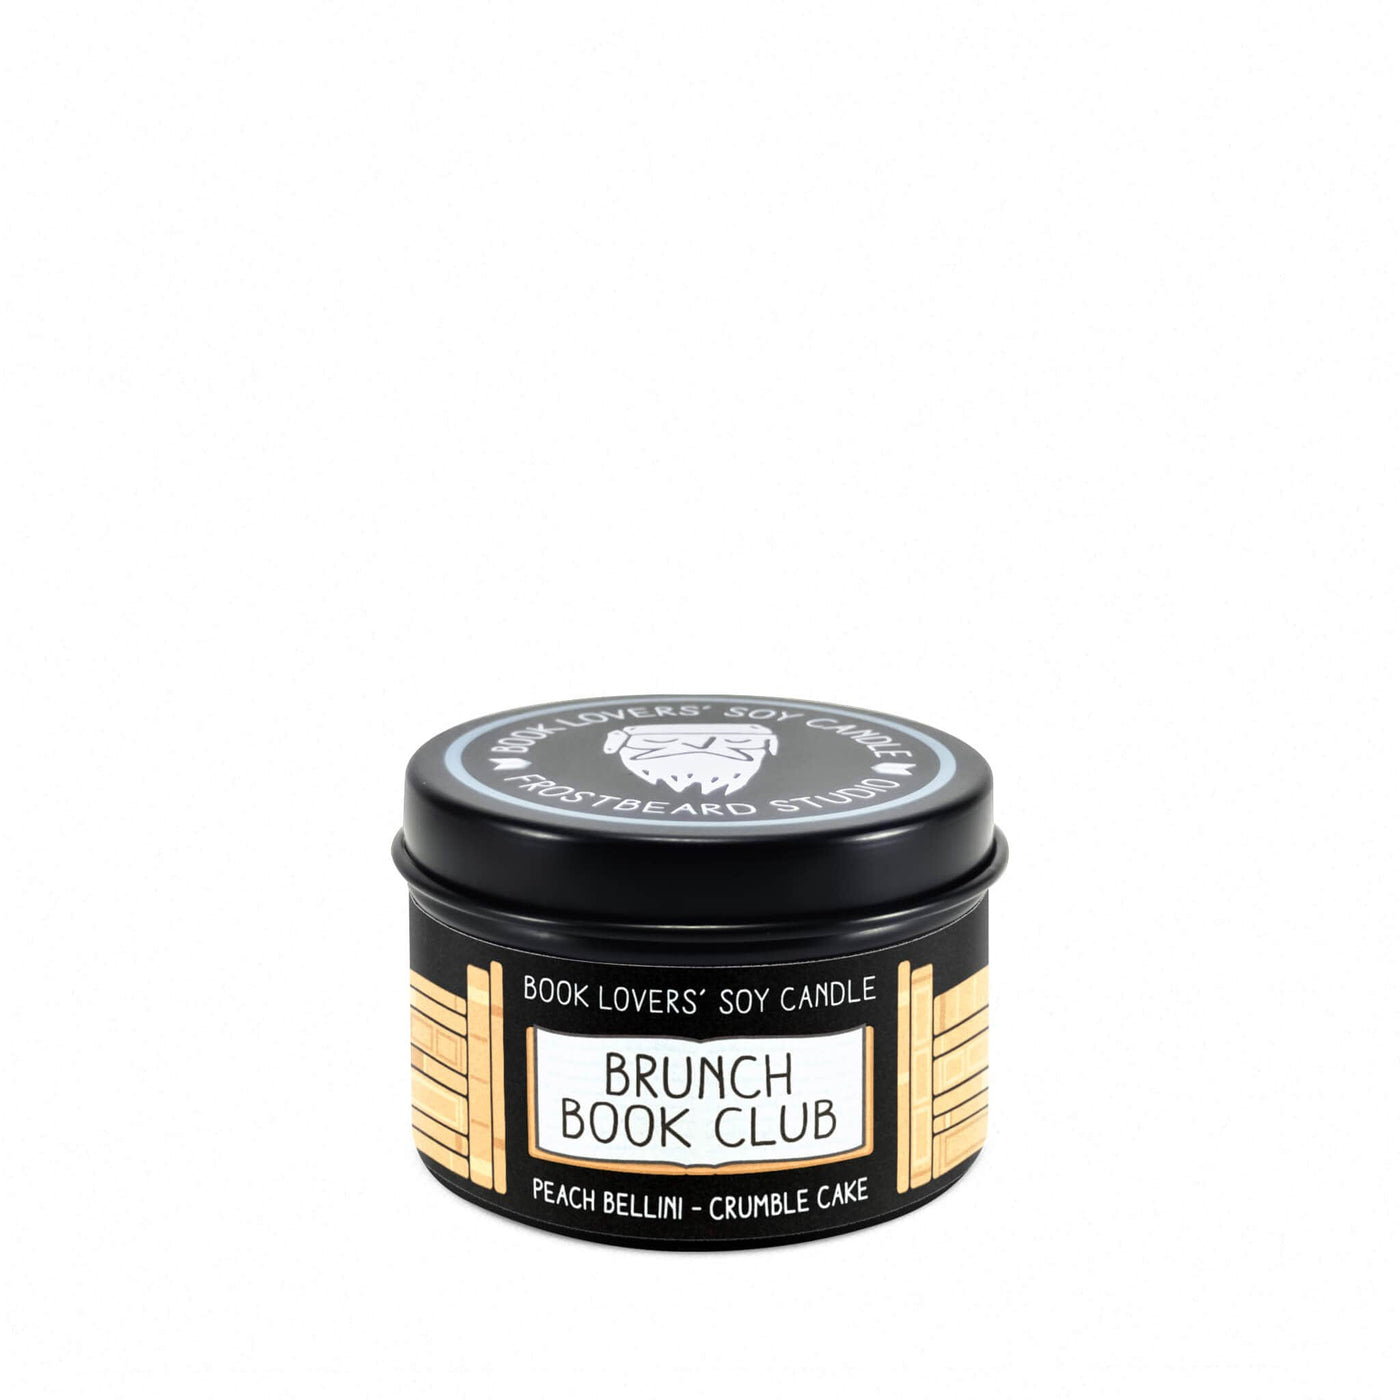 Brunch Book Club  -  2 oz Tin  -  Book Lovers' Soy Candle  -  Frostbeard Studio